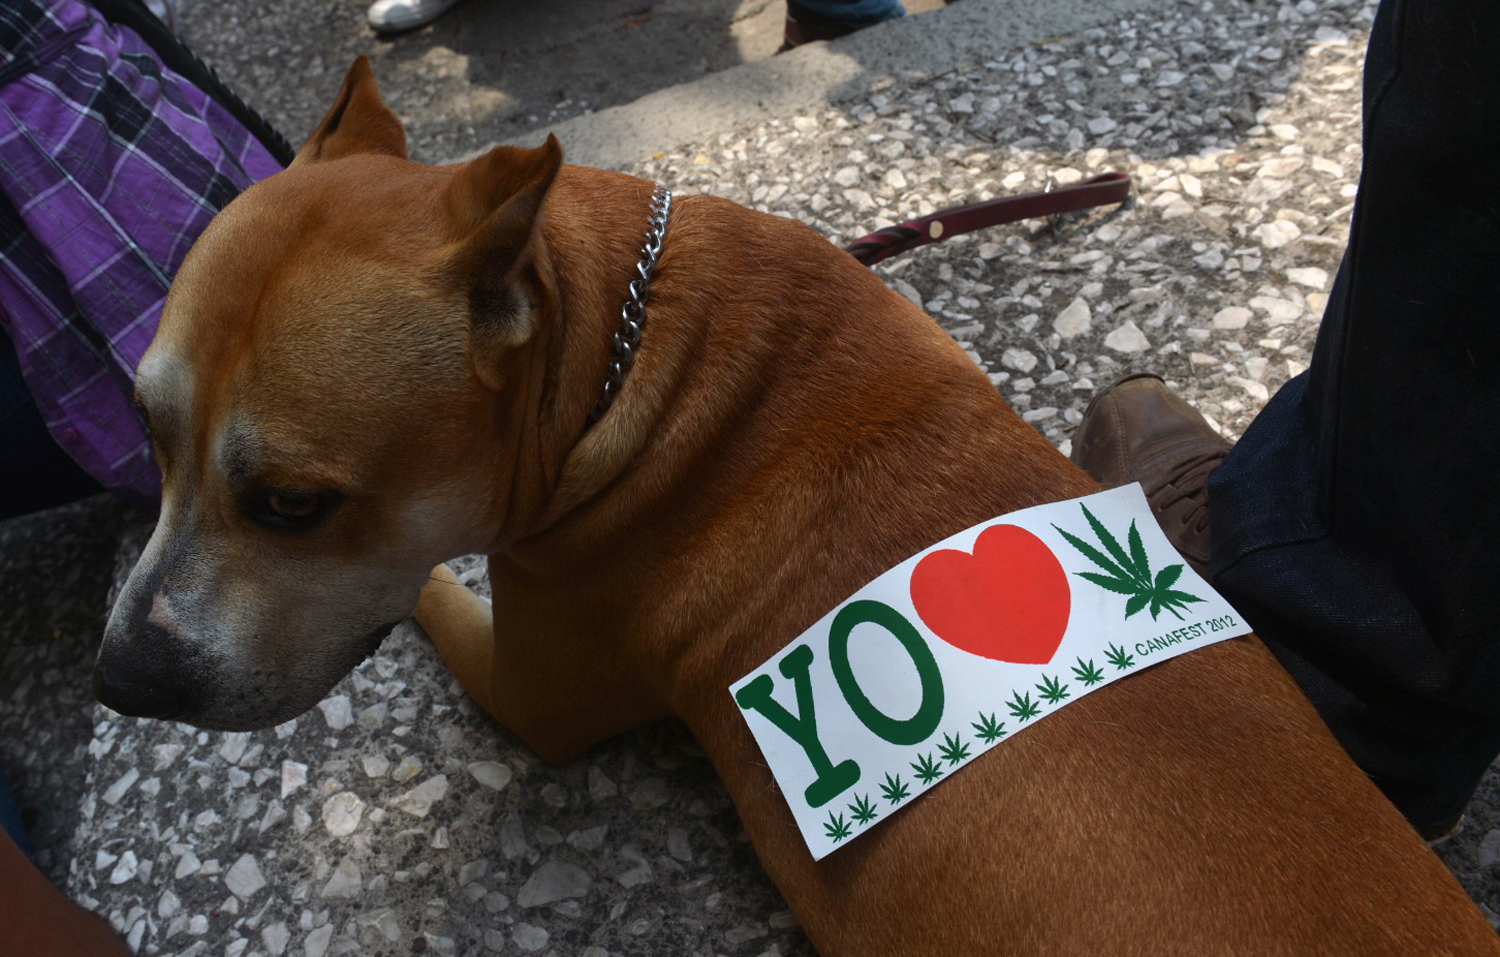 A sticker is seen on a dog's back during